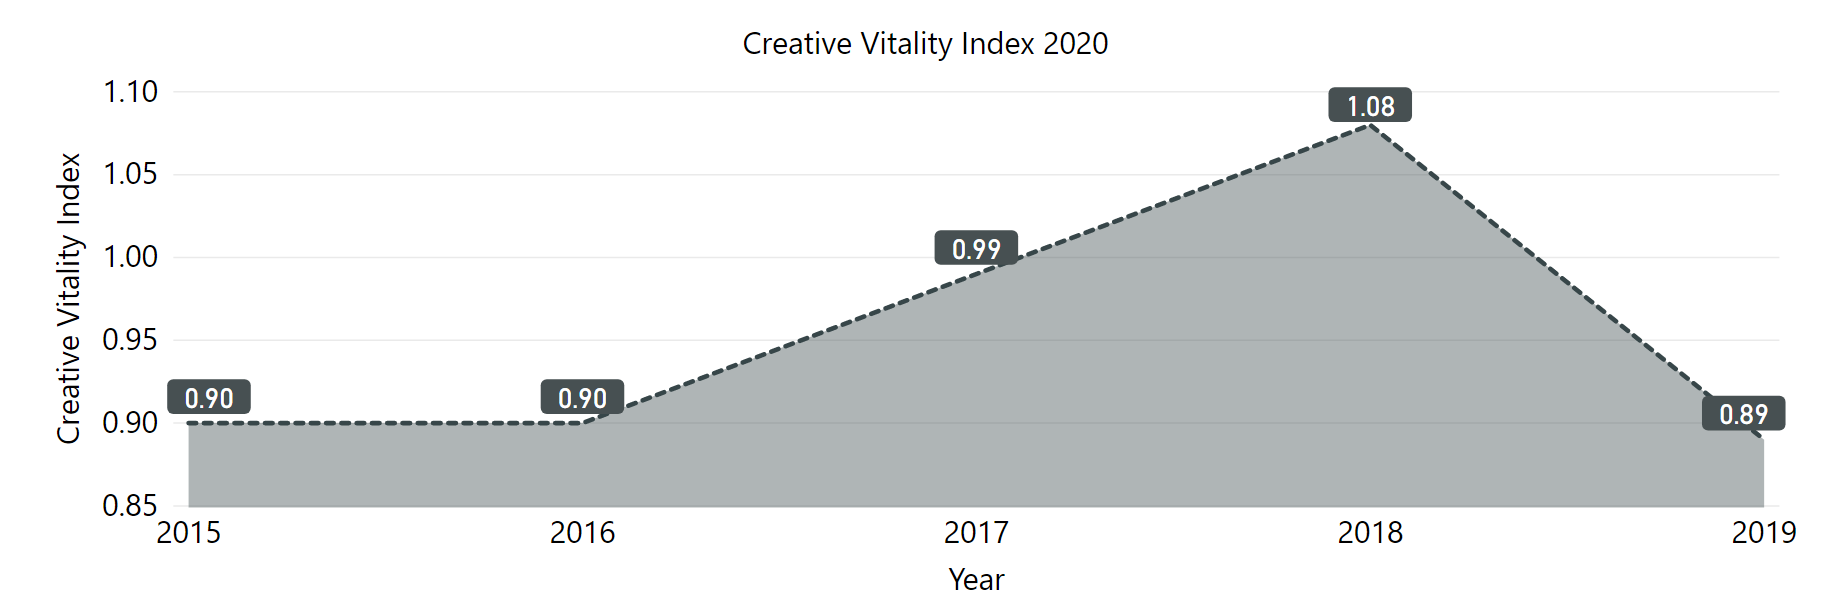 graph of creative vitality index from 2015 to 2019. Numbers increased from 2015 to 2018 and them dropped sharply in 2019.